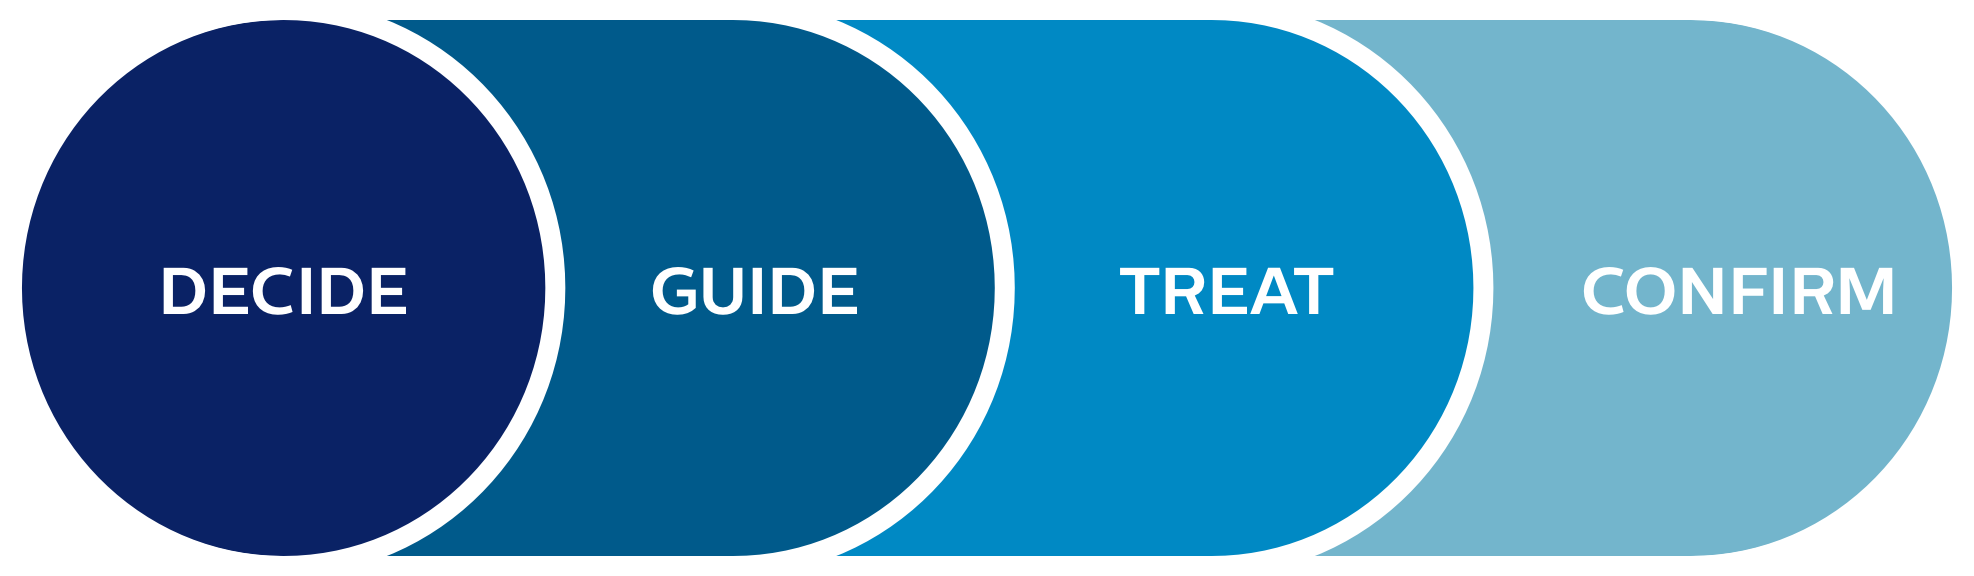 Decide guide treat confirm graphic